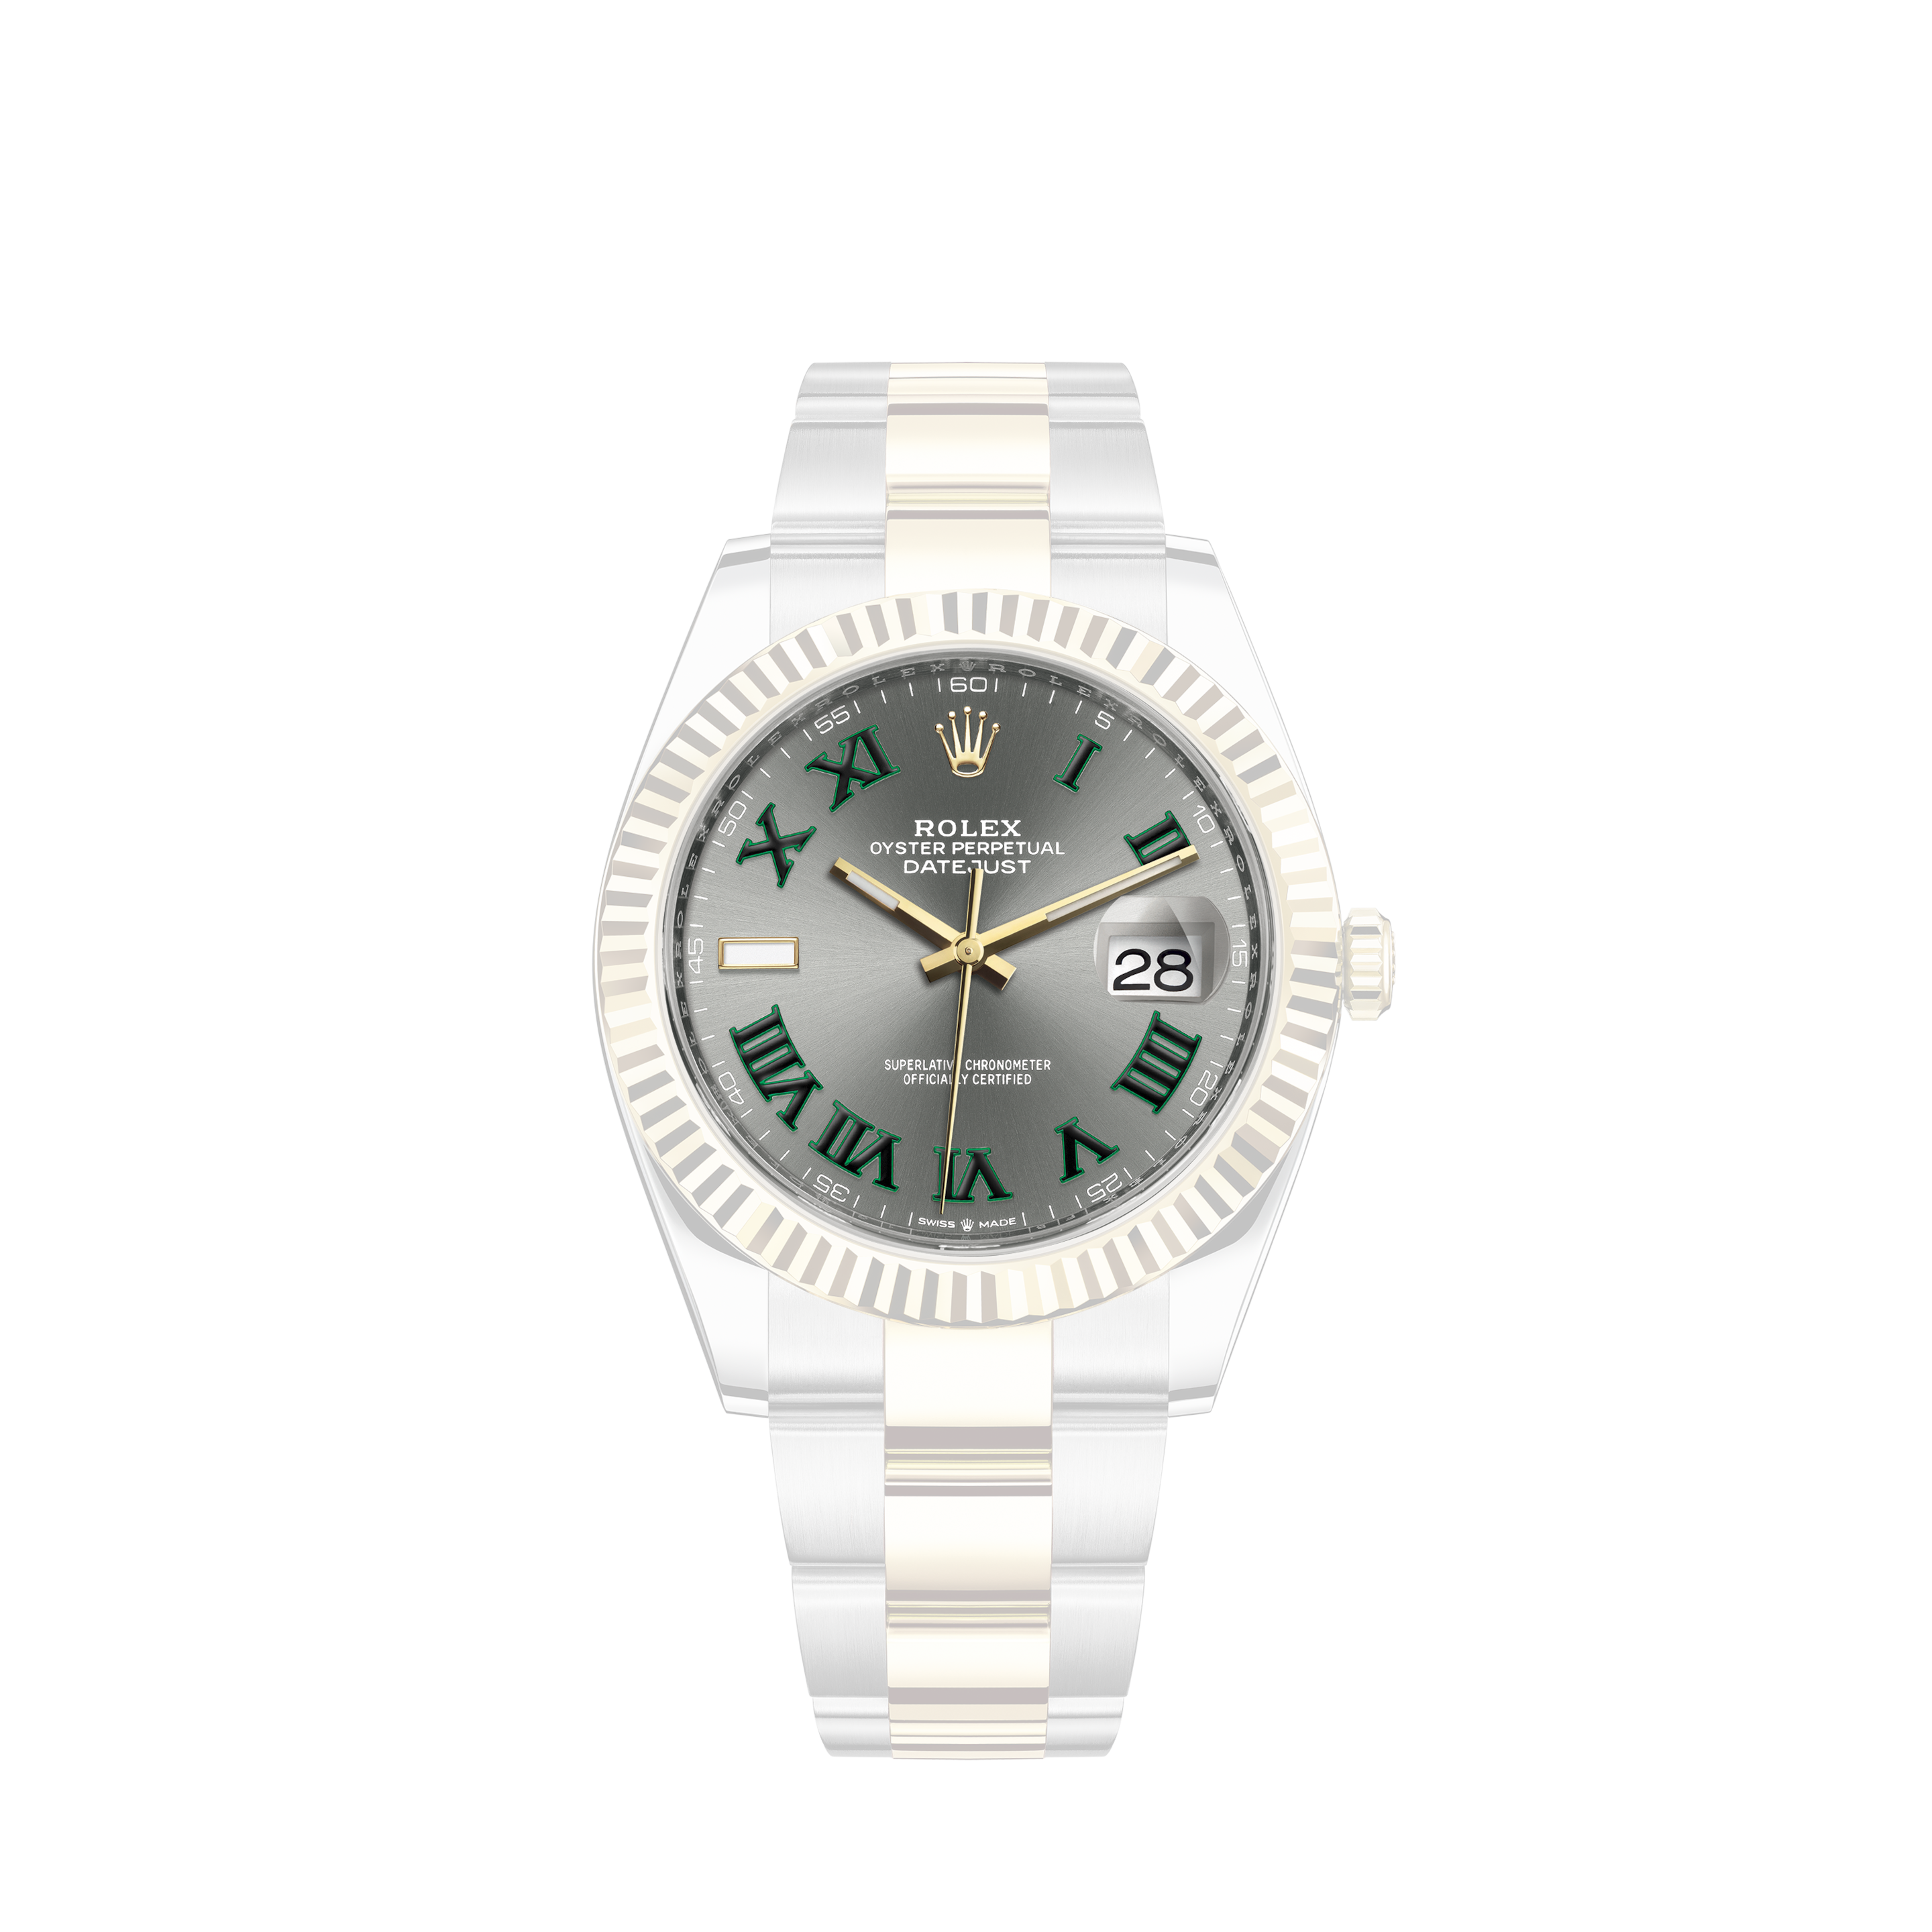 Rolex Submariner Date Oyster Steel and Yellow Gold - ref 126613LB [ 2020 Model ]